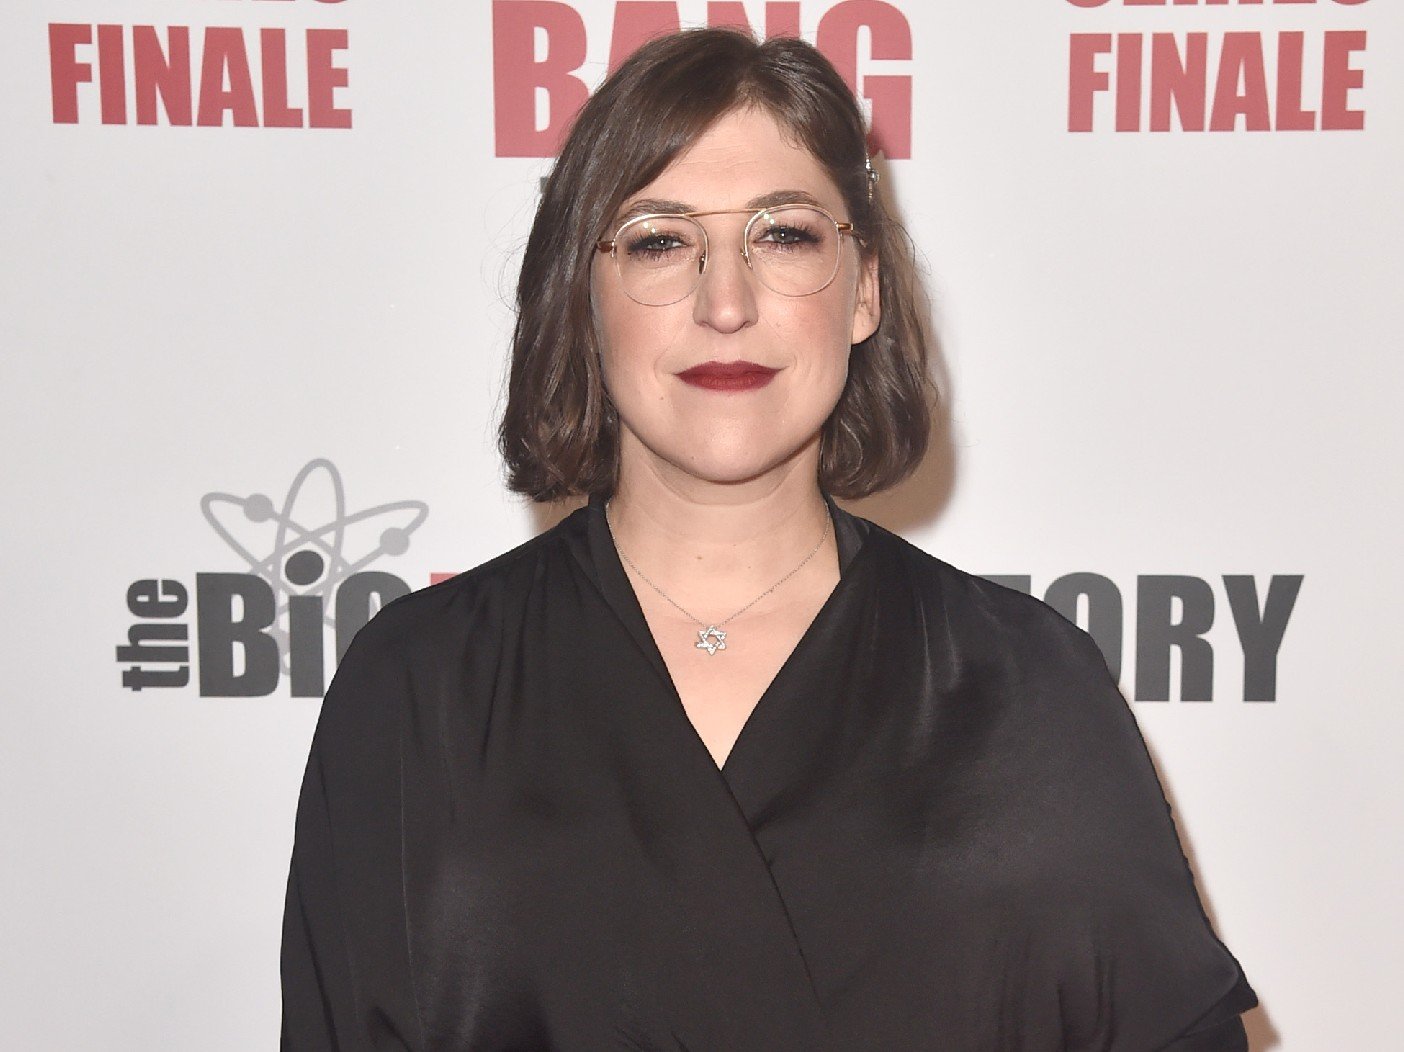 Just How Long Will Mayim Bialik Be Hosting ‘Jeopardy!’